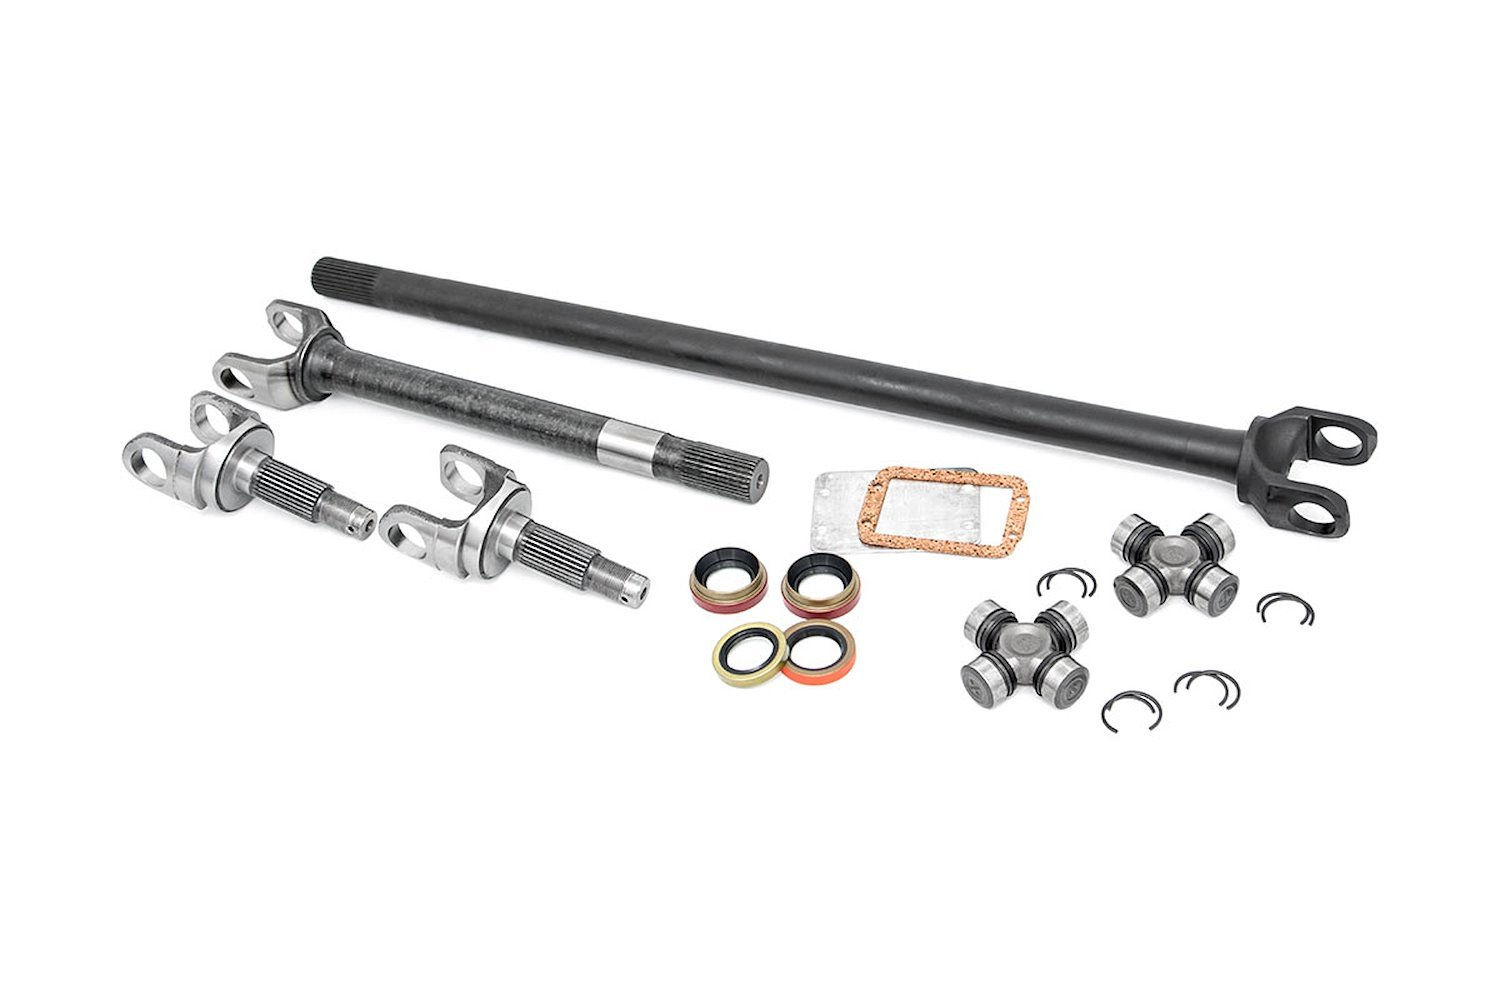 RCW24110 4340 Chromoly Replacement Front Axle Kit -